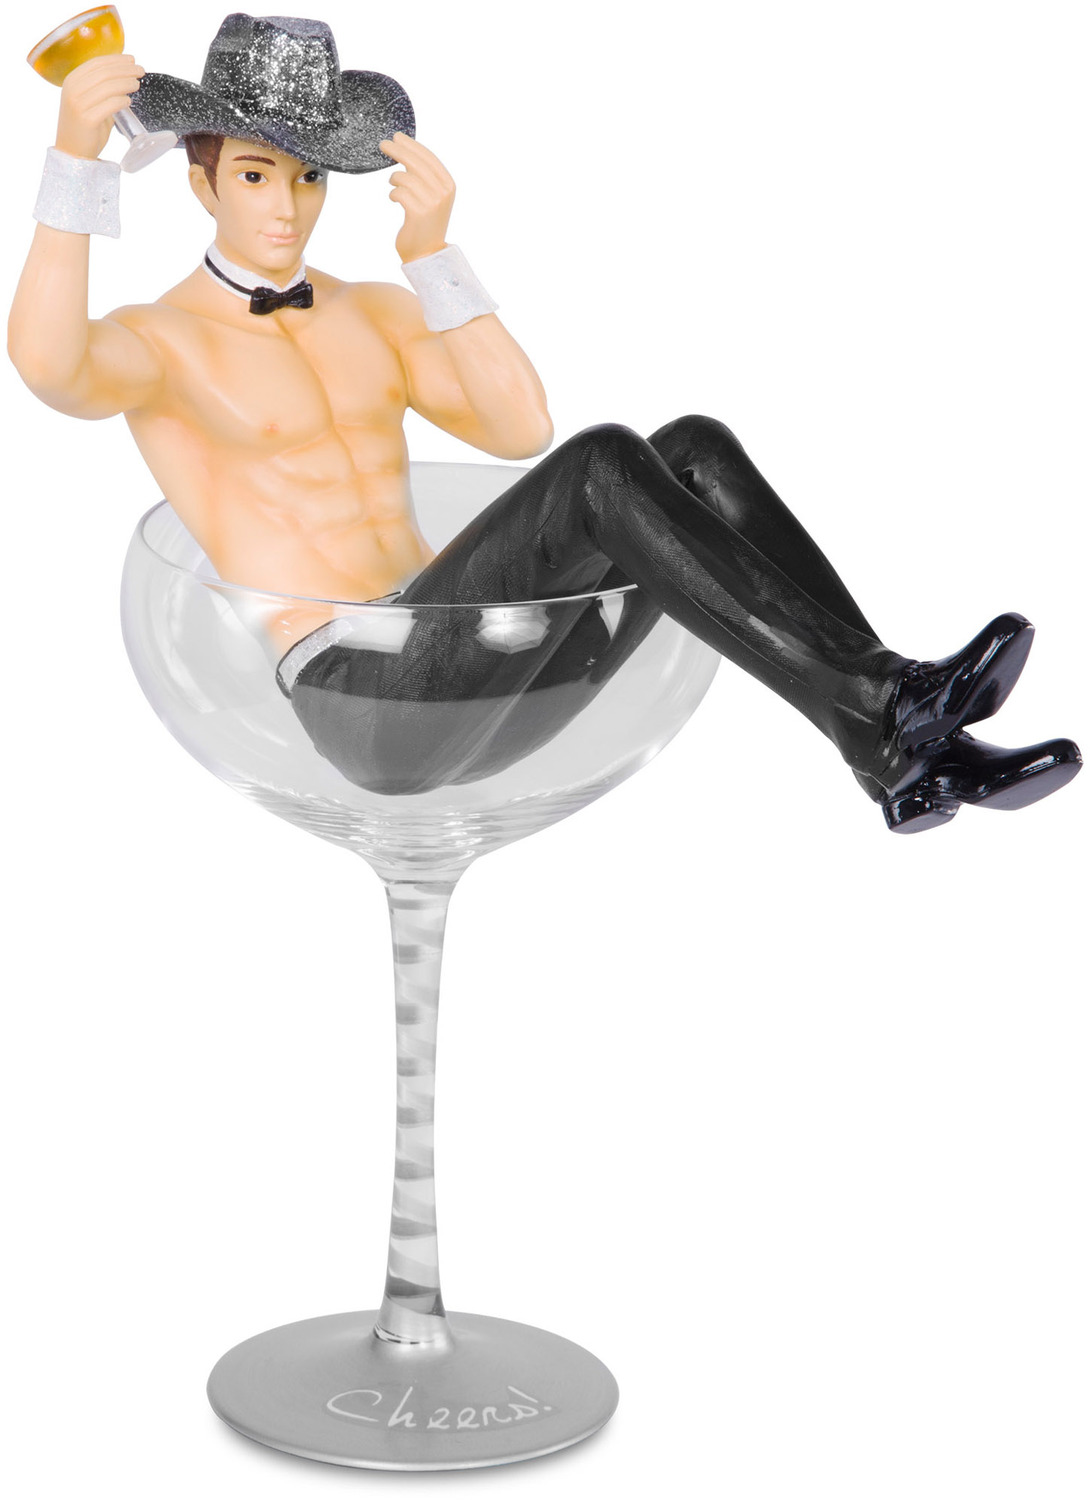 Cheers! by Hiccup - <em>Cheers!</em> - Male Figurine & Champagne Glass -